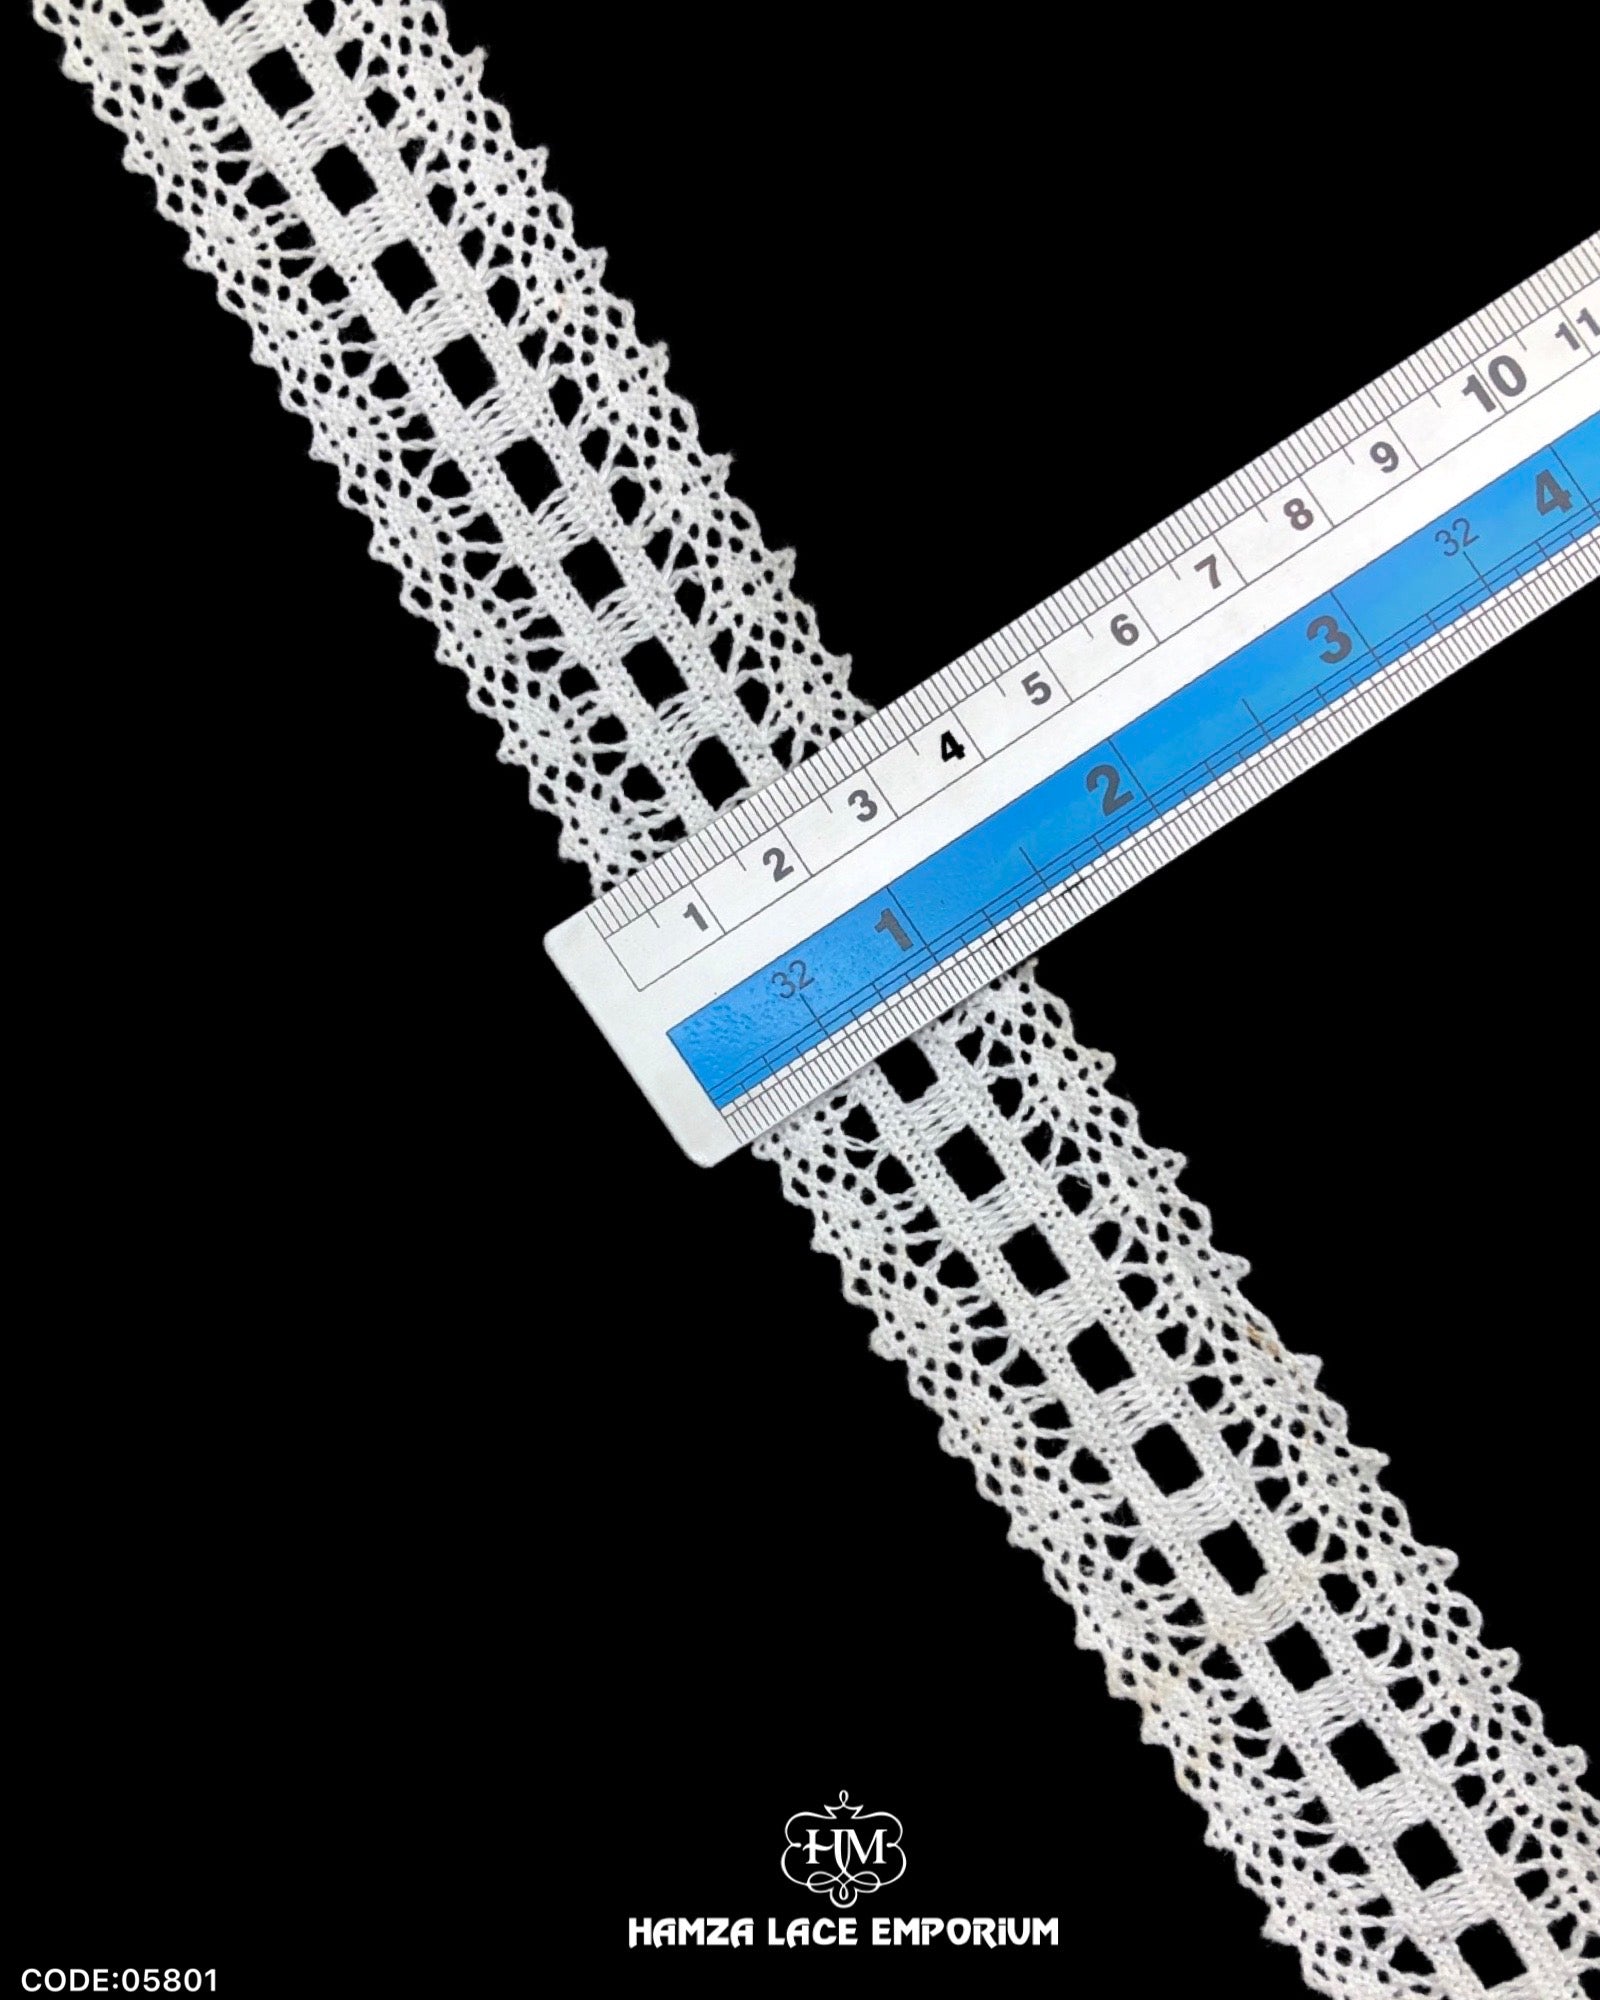 Size of the 'Center Filling Crochet Lace 05801' is shown with the help of a ruler as '1' inch